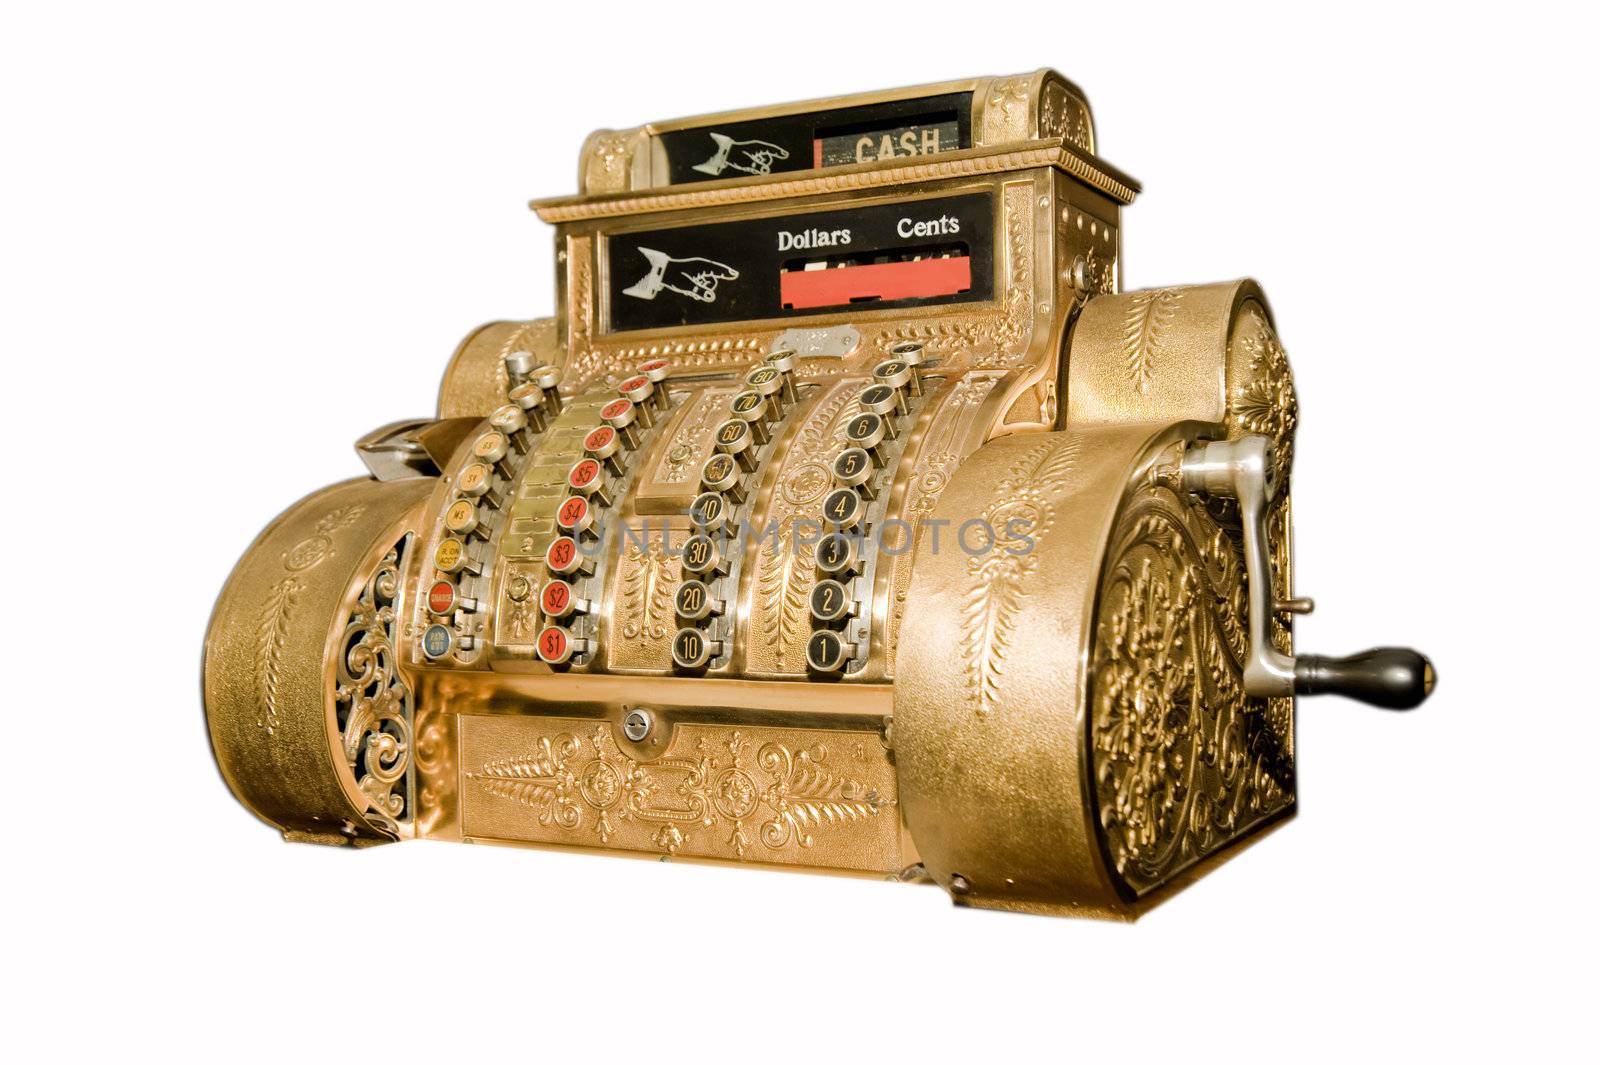  The antiquarian cash register isolated on the white